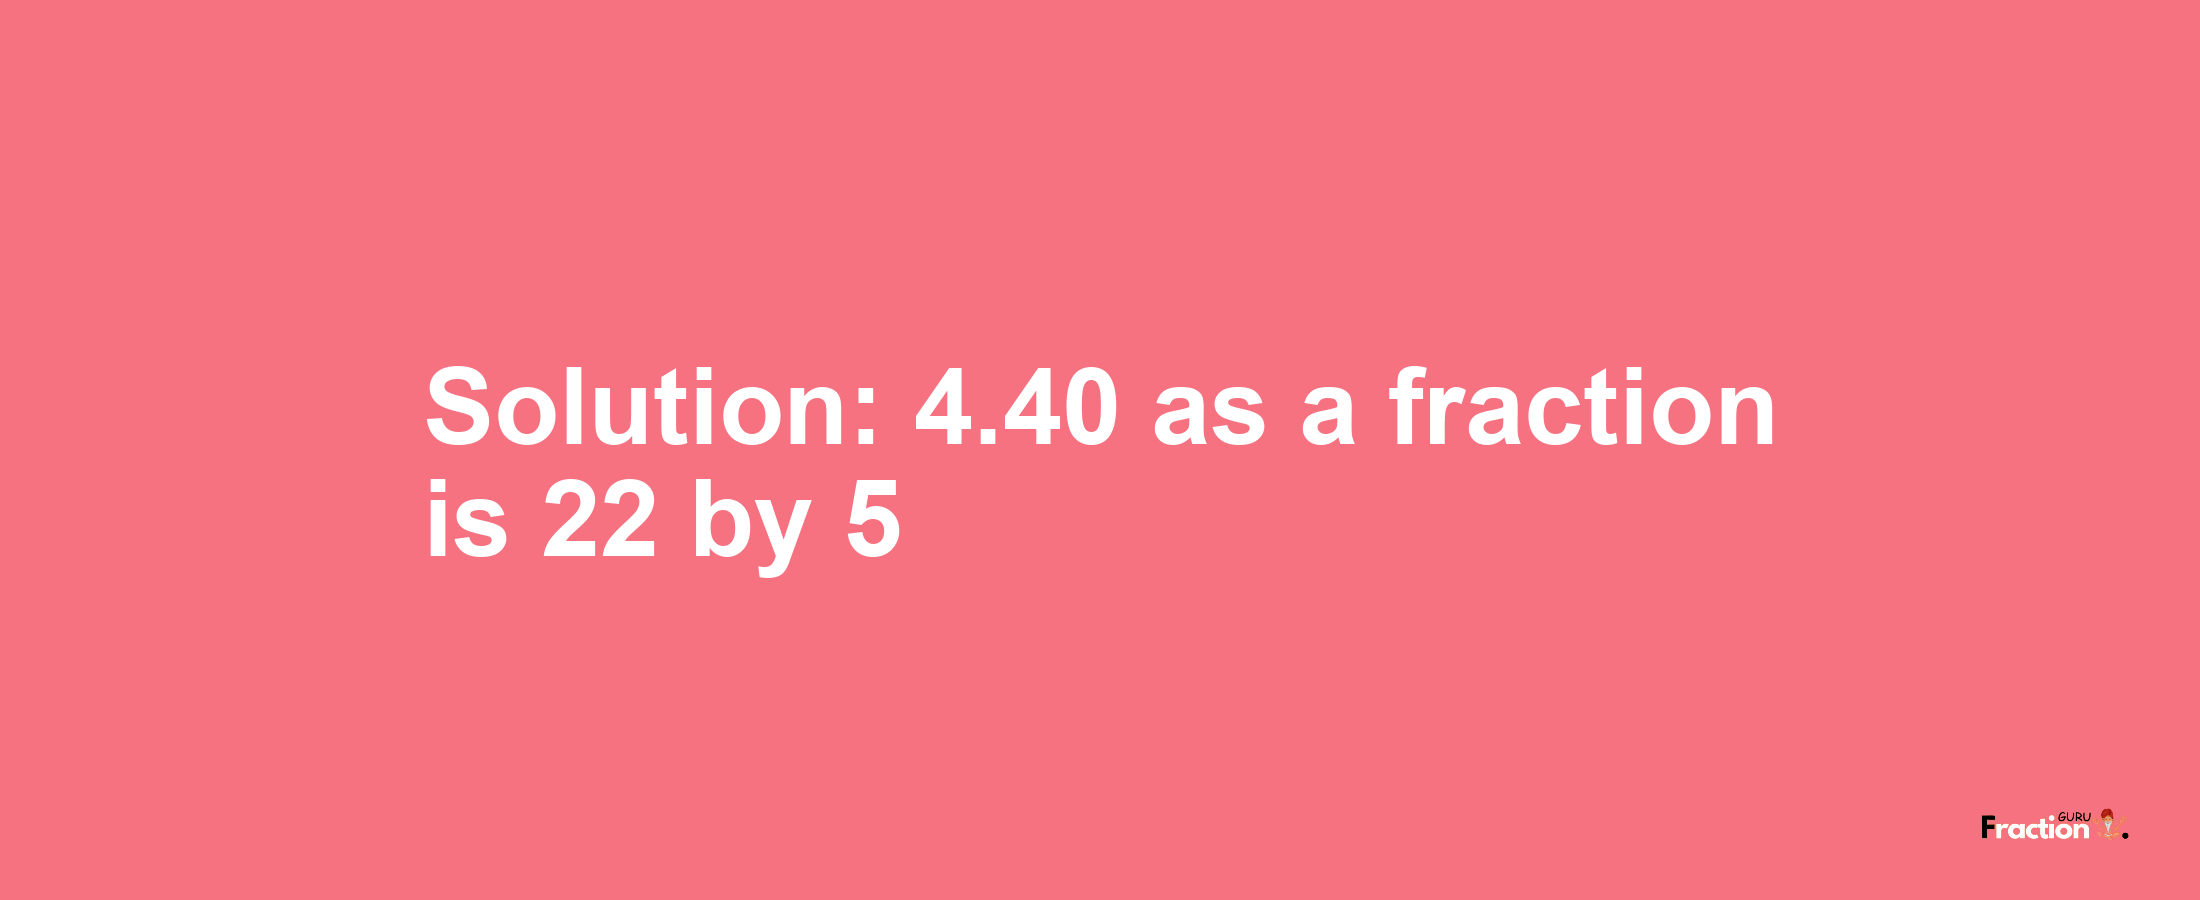 Solution:4.40 as a fraction is 22/5